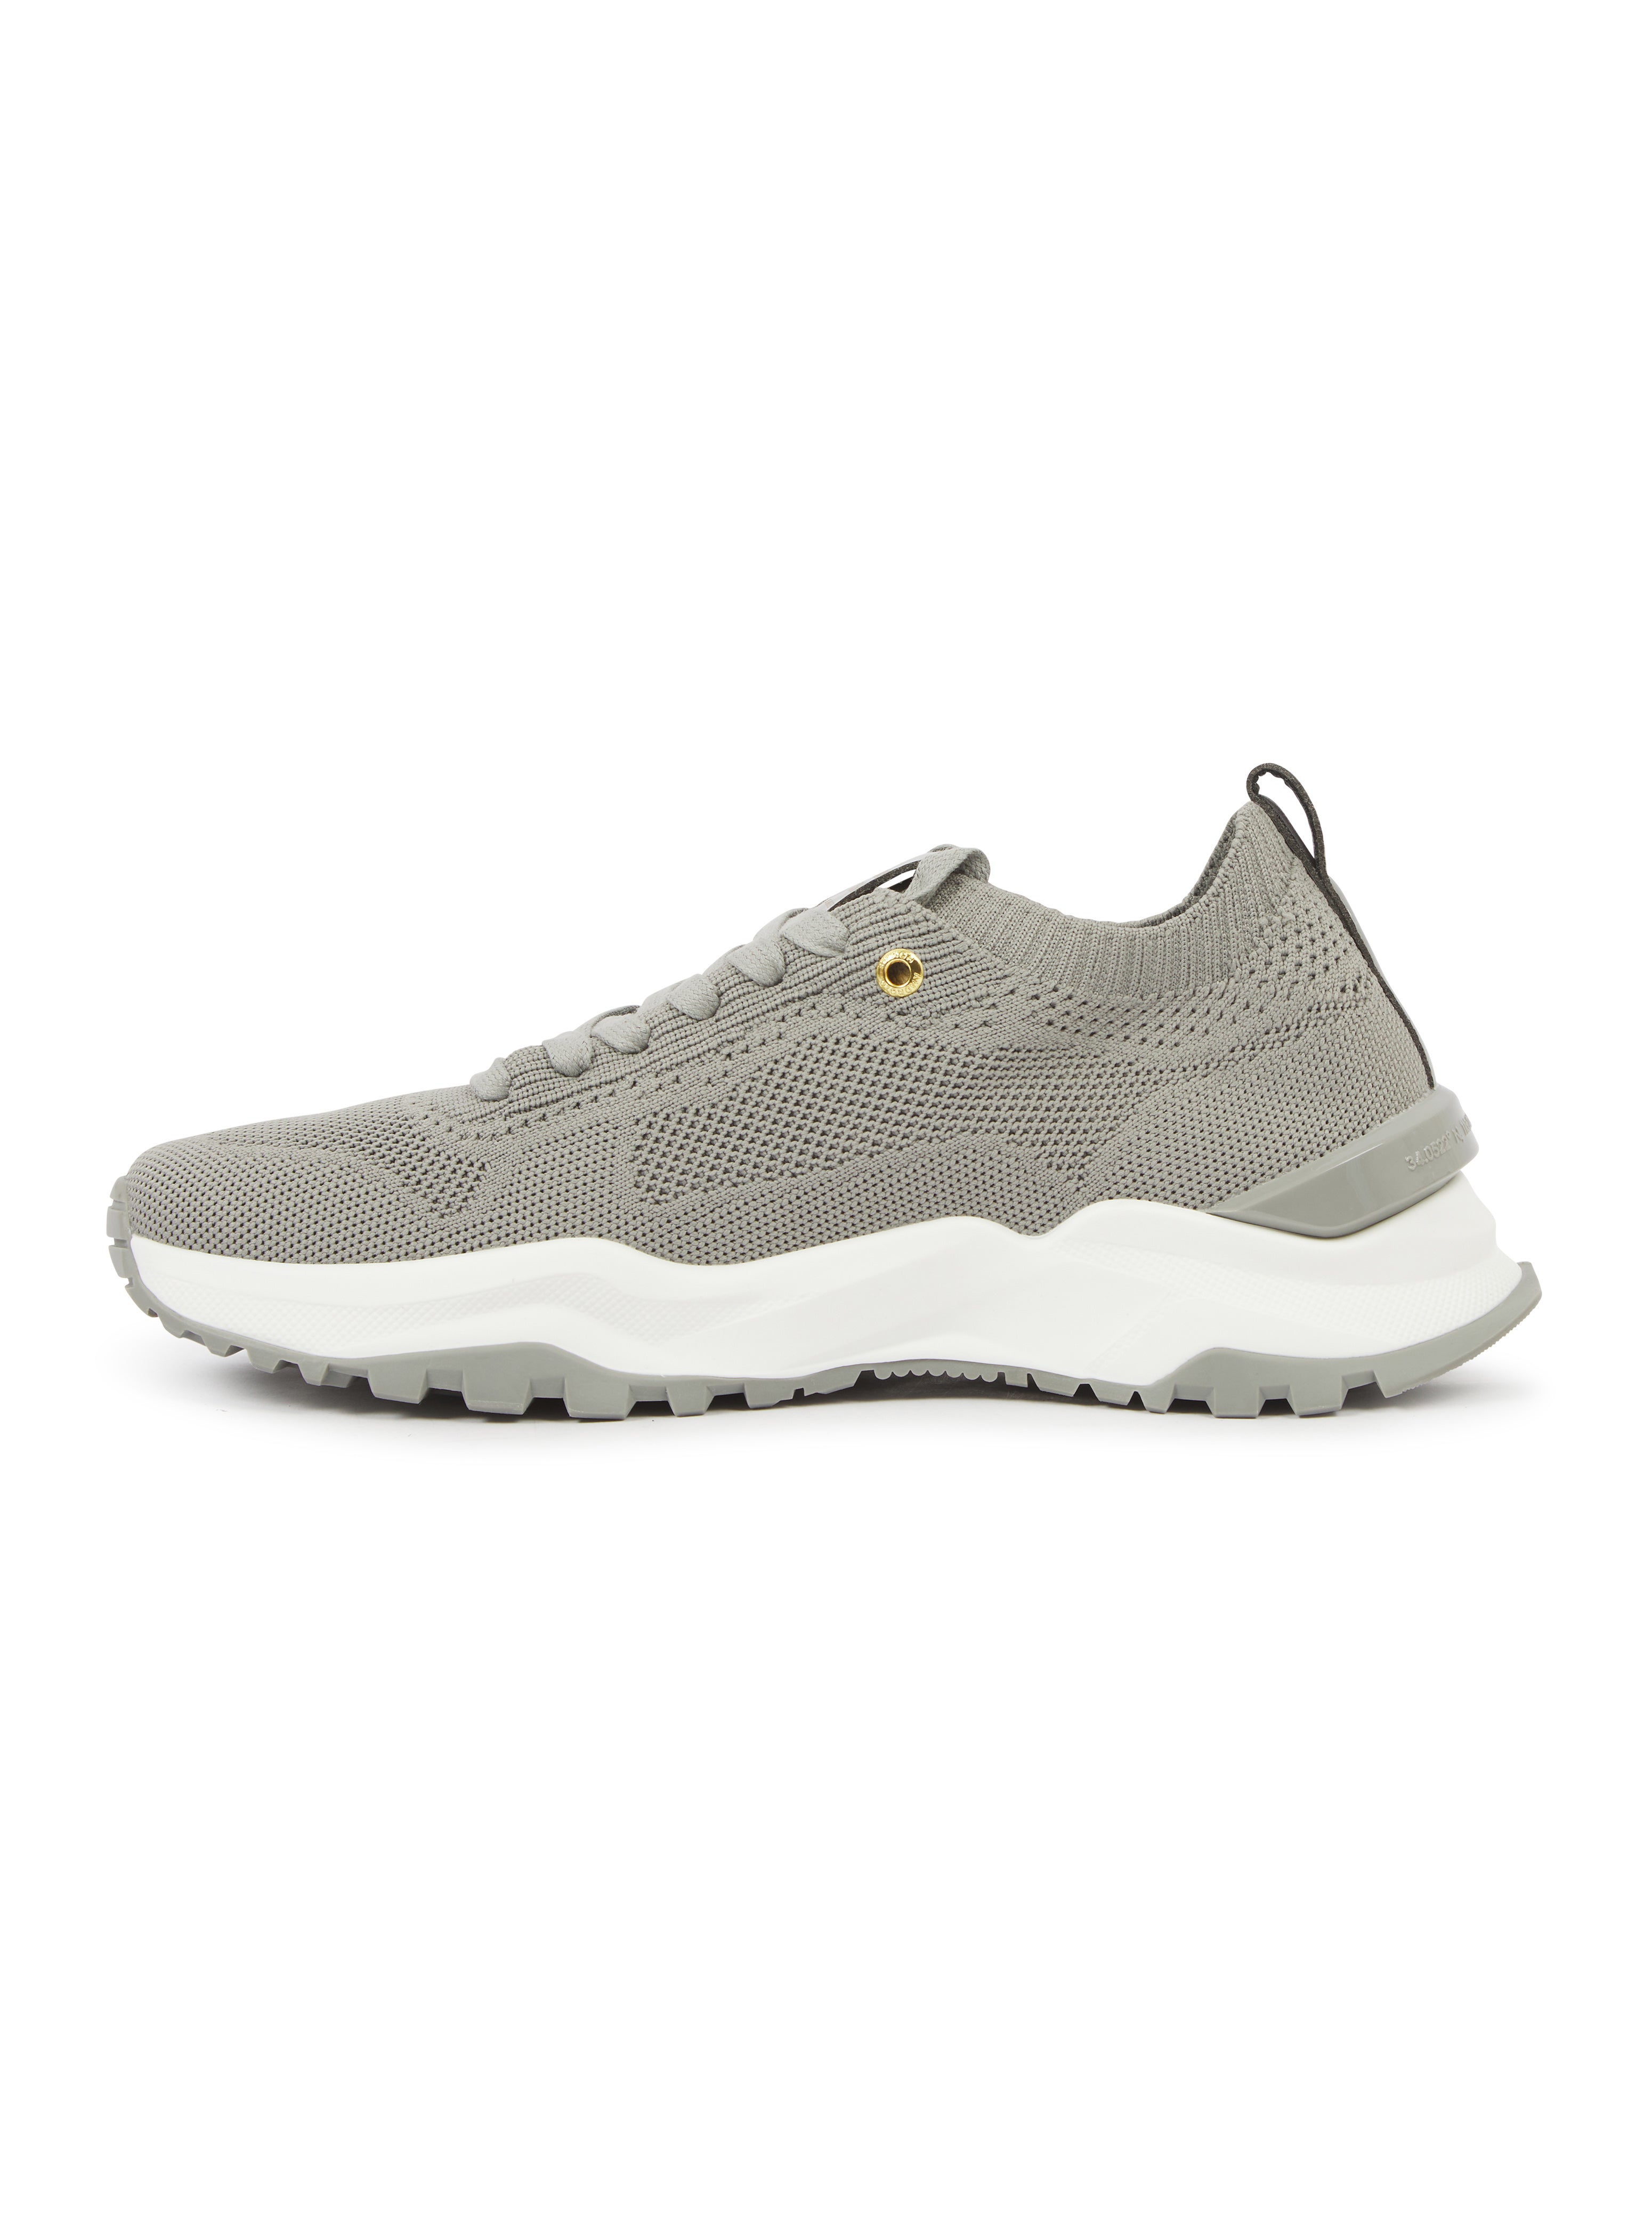 Load image into Gallery viewer, Android Homme Leo Carillo Grey Knit Trainer
